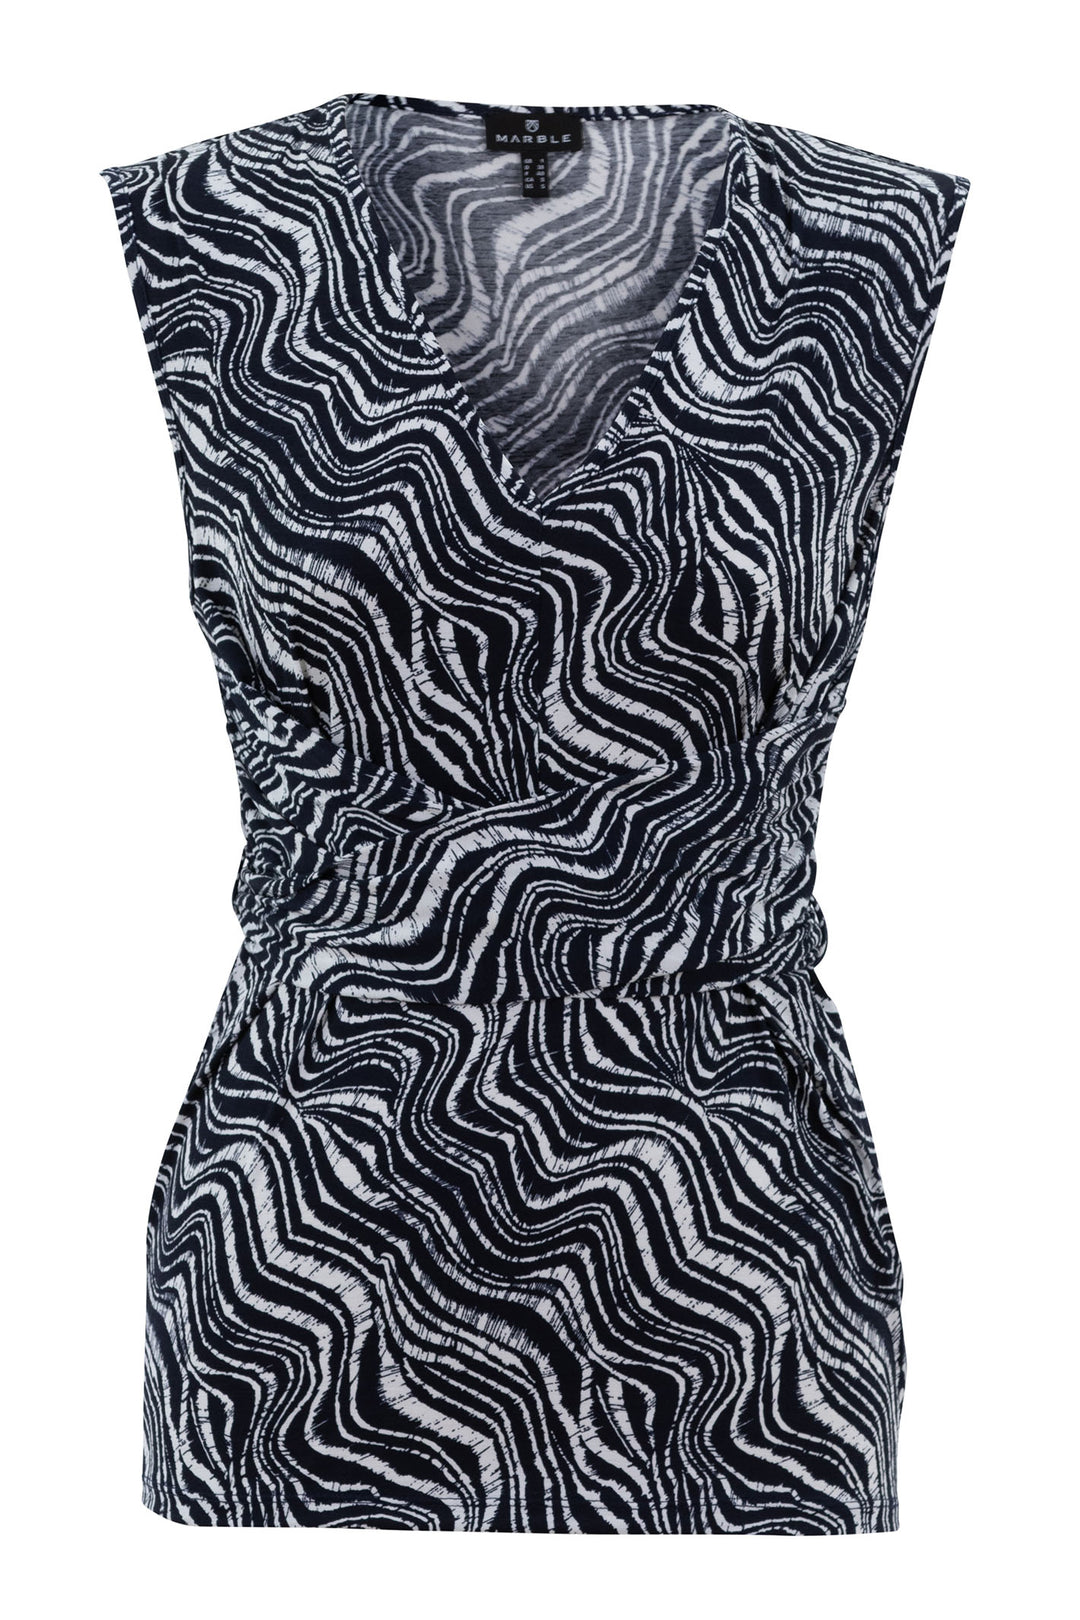 Marble Fashions 7426 103 Navy Print Wrap Top - Experience Boutique